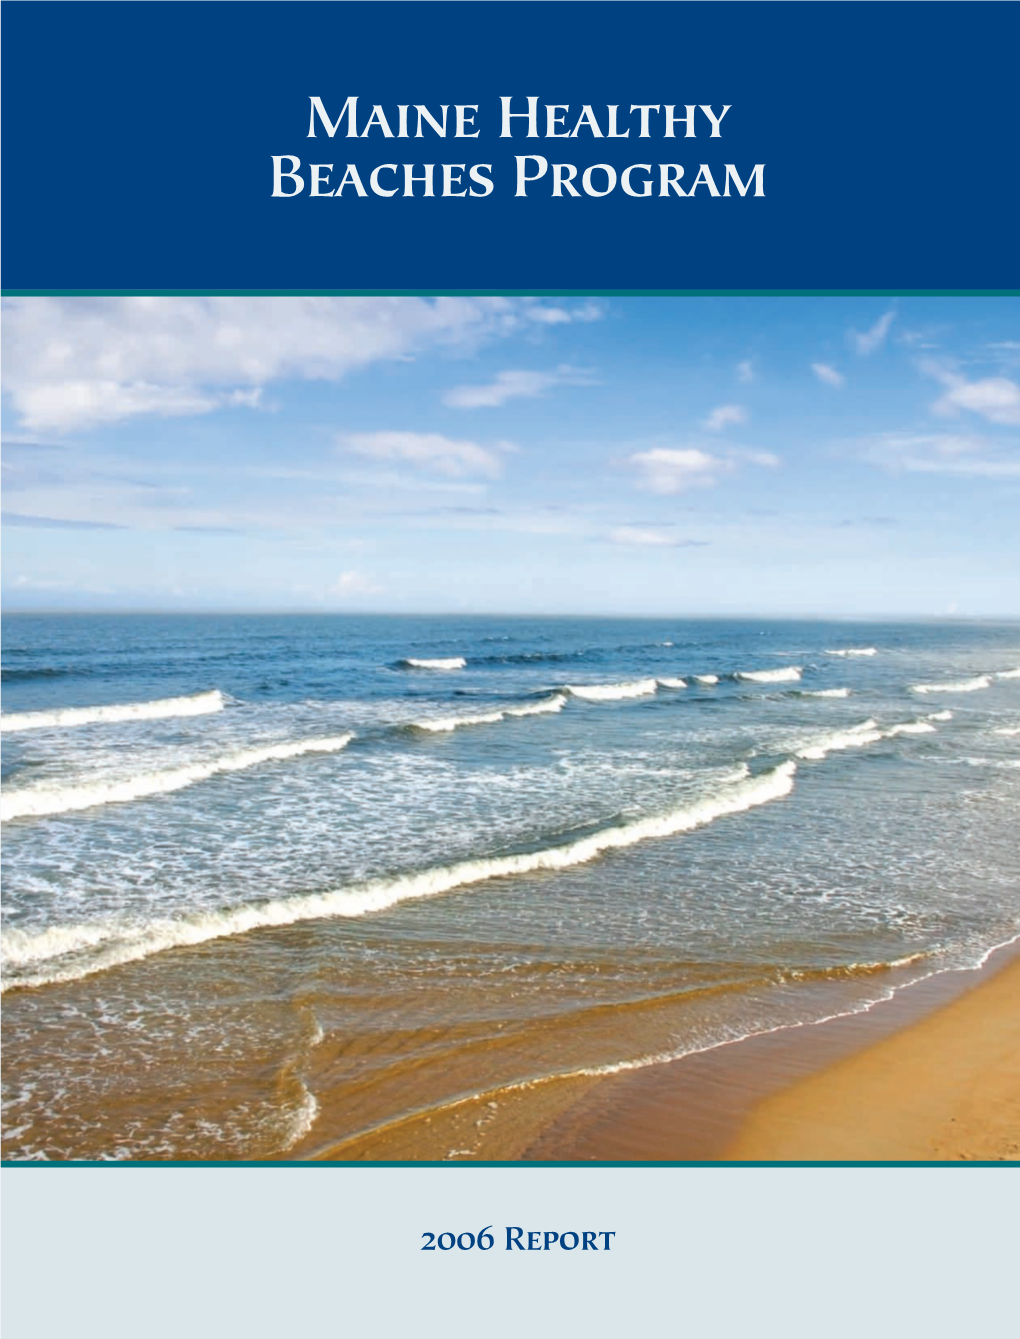 Maine Healthy Beaches Program Experienced 147 Advisories and Closures on 44 Beaches in 2006